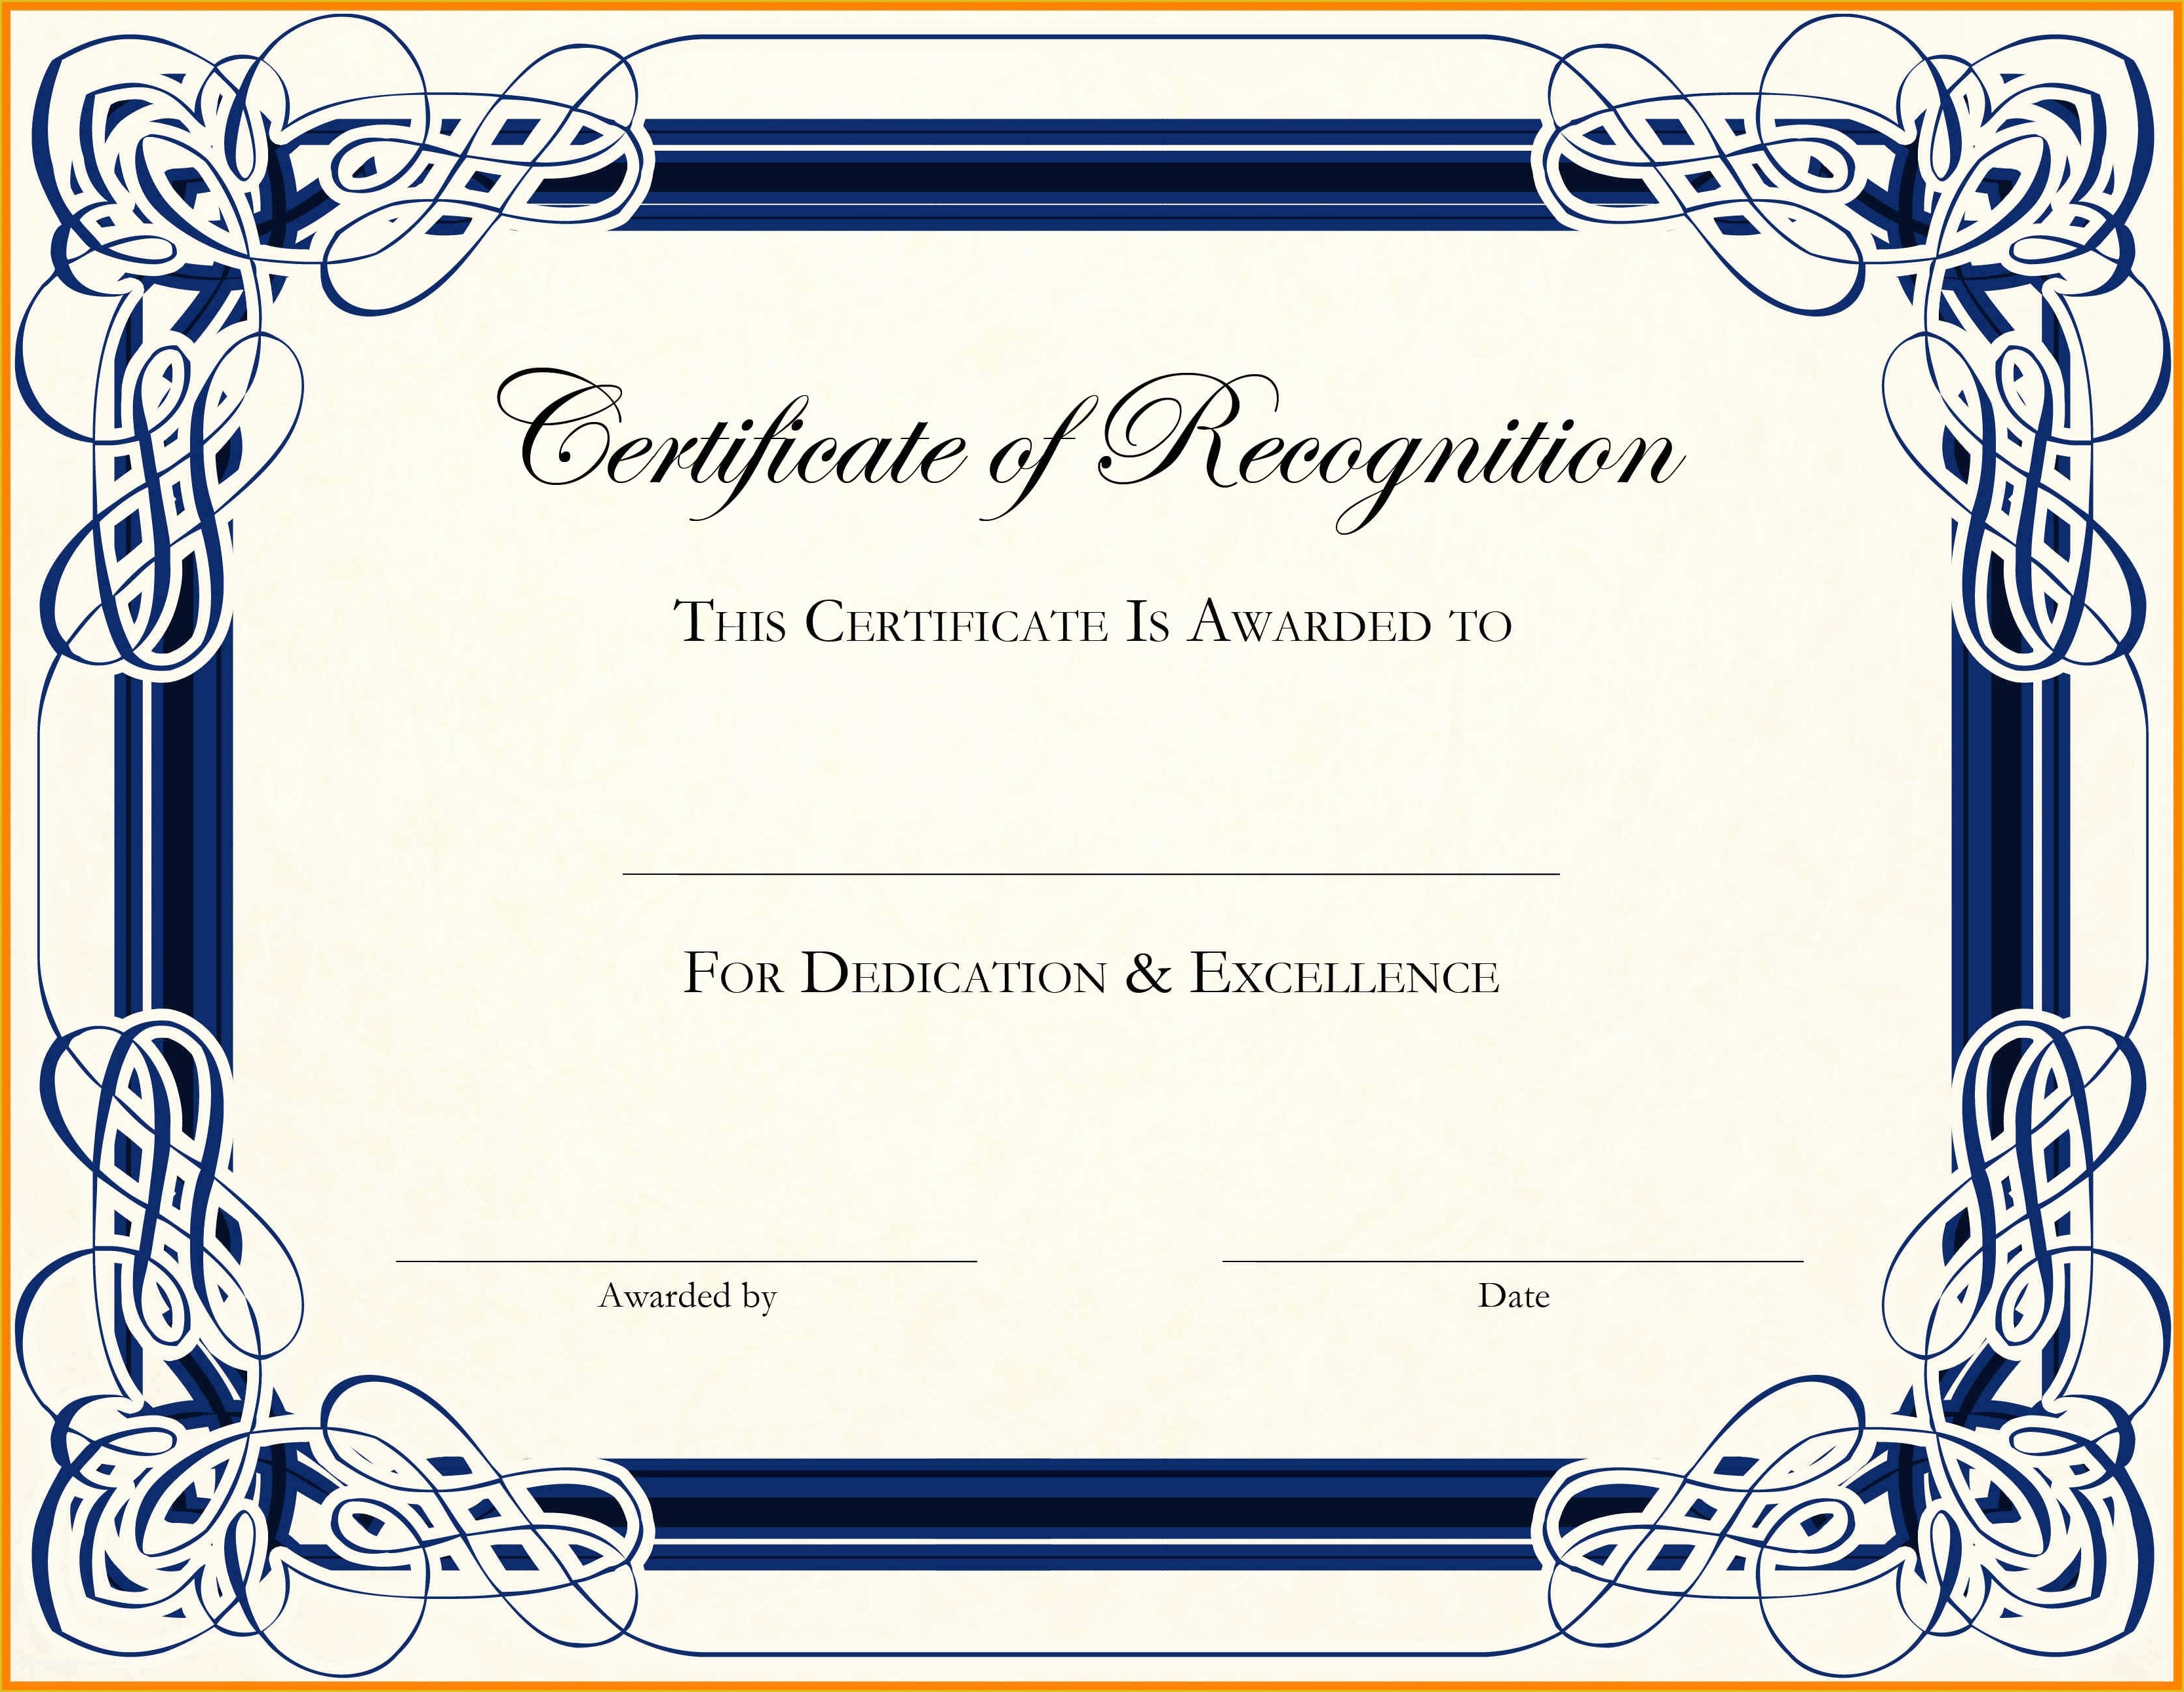 Diploma Certificate Template Free Download Of 15 Certificate Templates Word Free